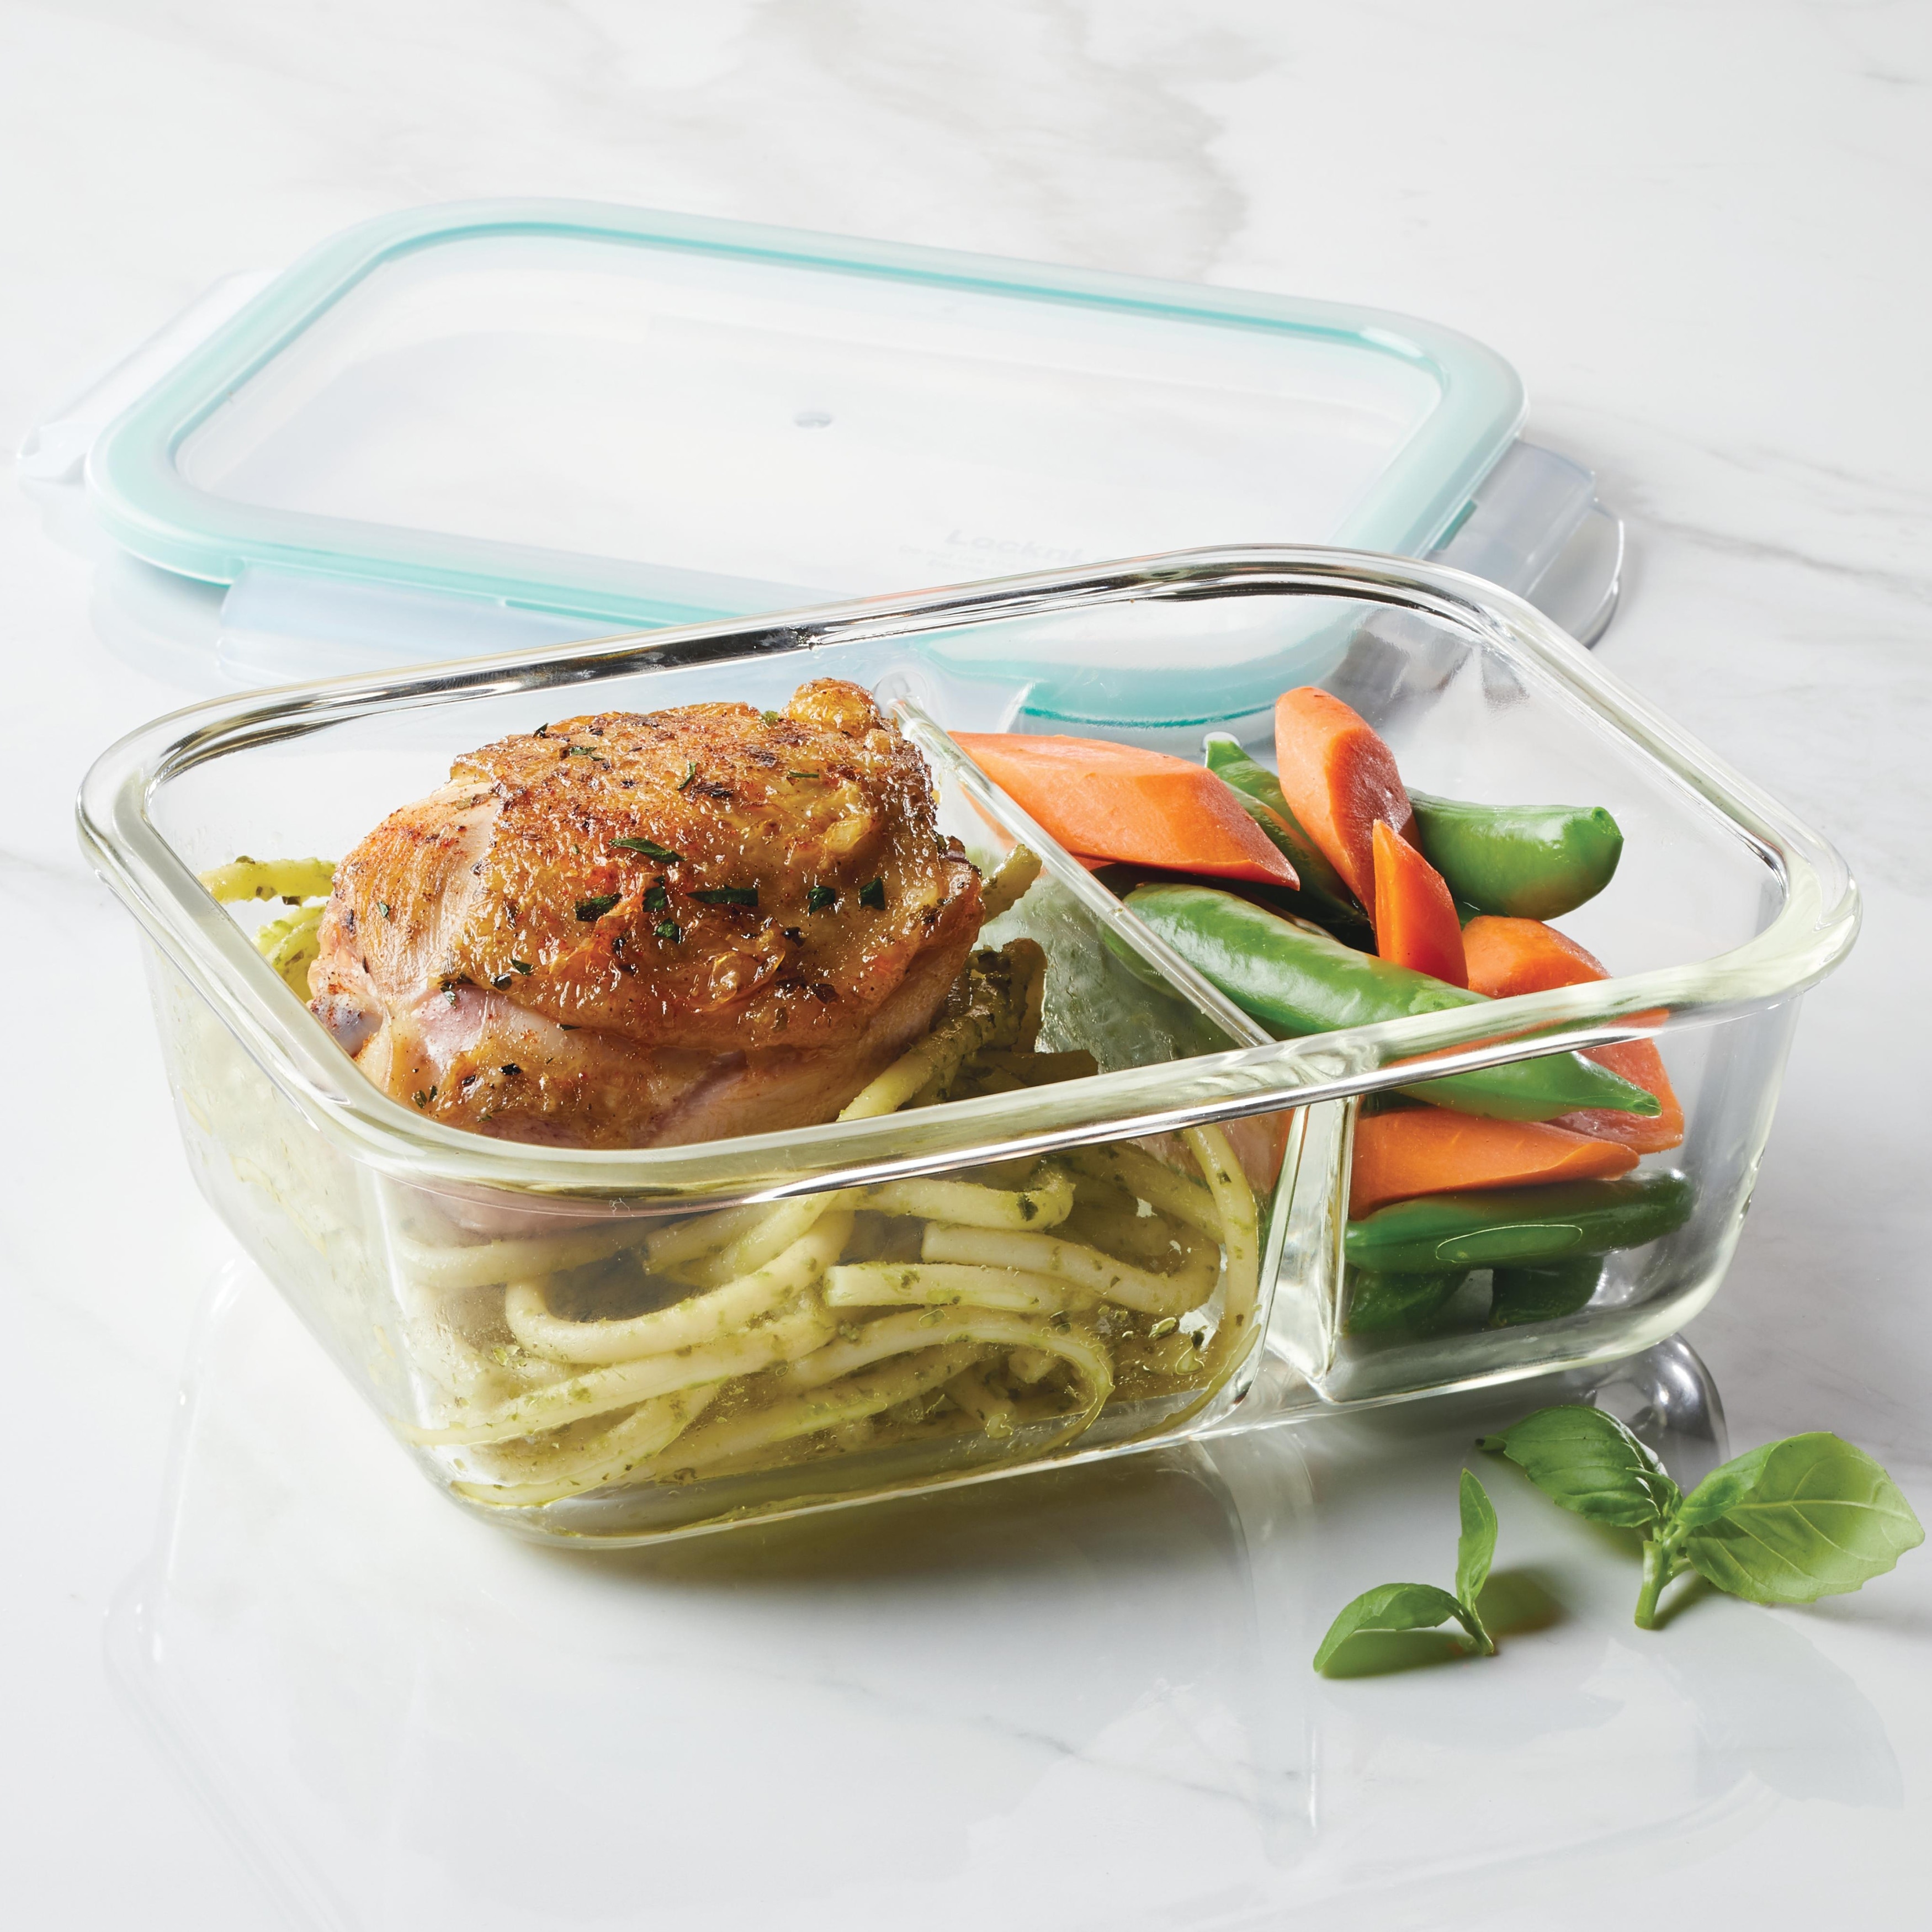 https://ak1.ostkcdn.com/images/products/is/images/direct/ce6341215d34345beb58fdd39fb575534534c936/LocknLock-Purely-Better-Glass-Divided-Food-Storage-25oz-3-PC-Set.jpg